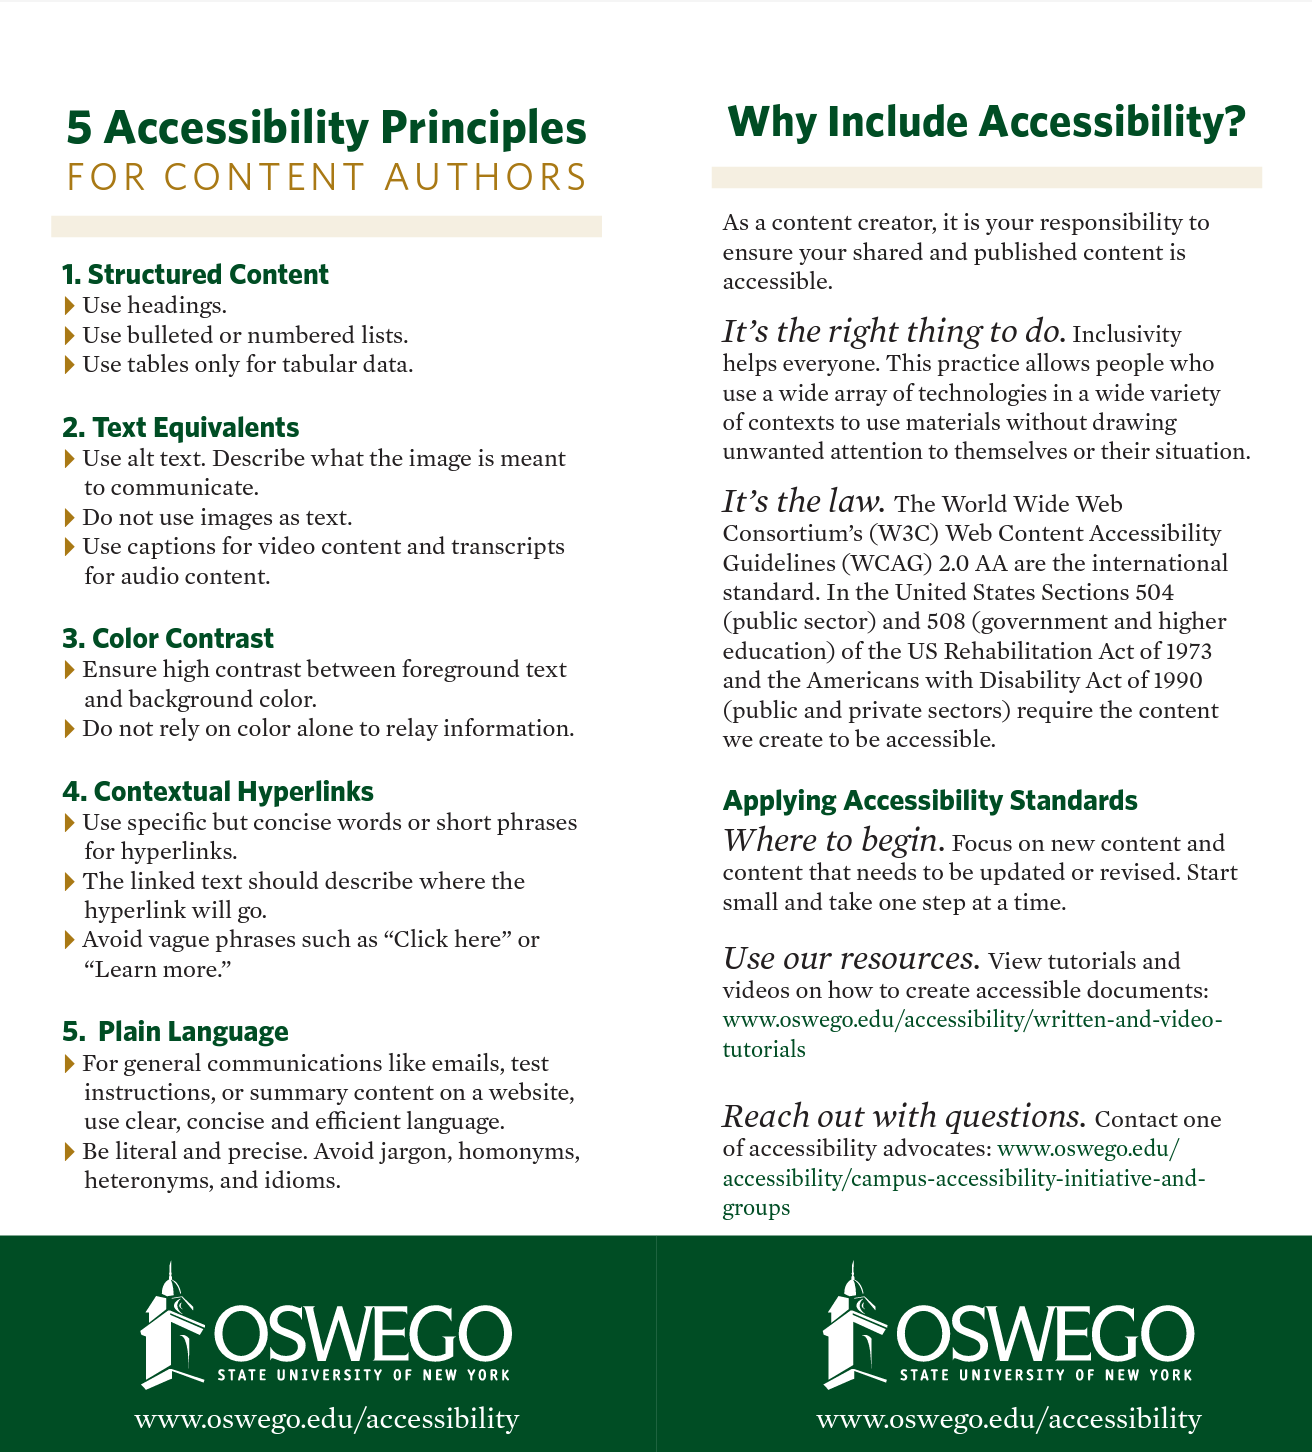 5 accessibility principles one-pager for higher education